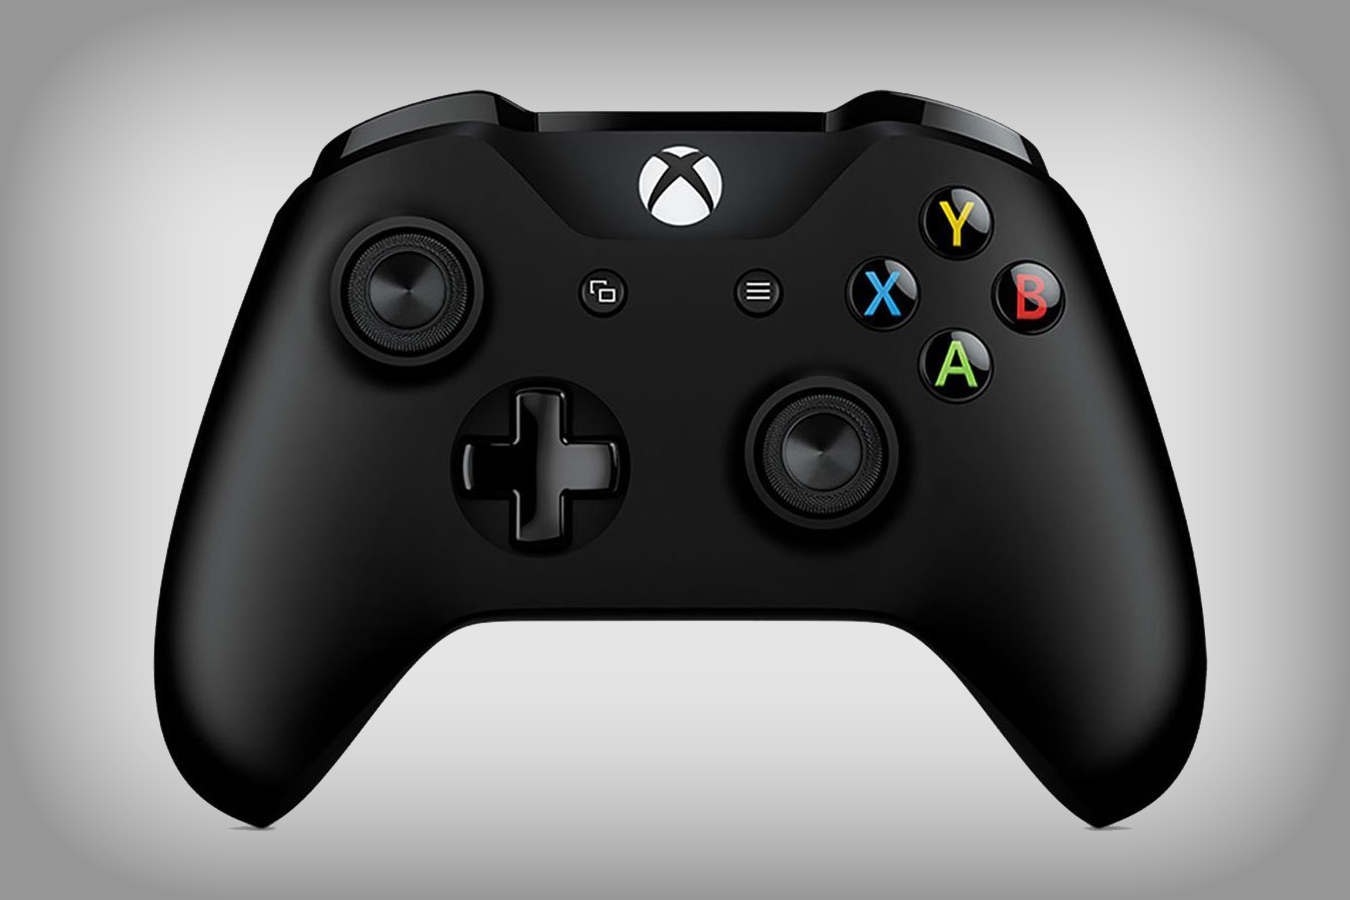 How to use an Xbox controller on PC